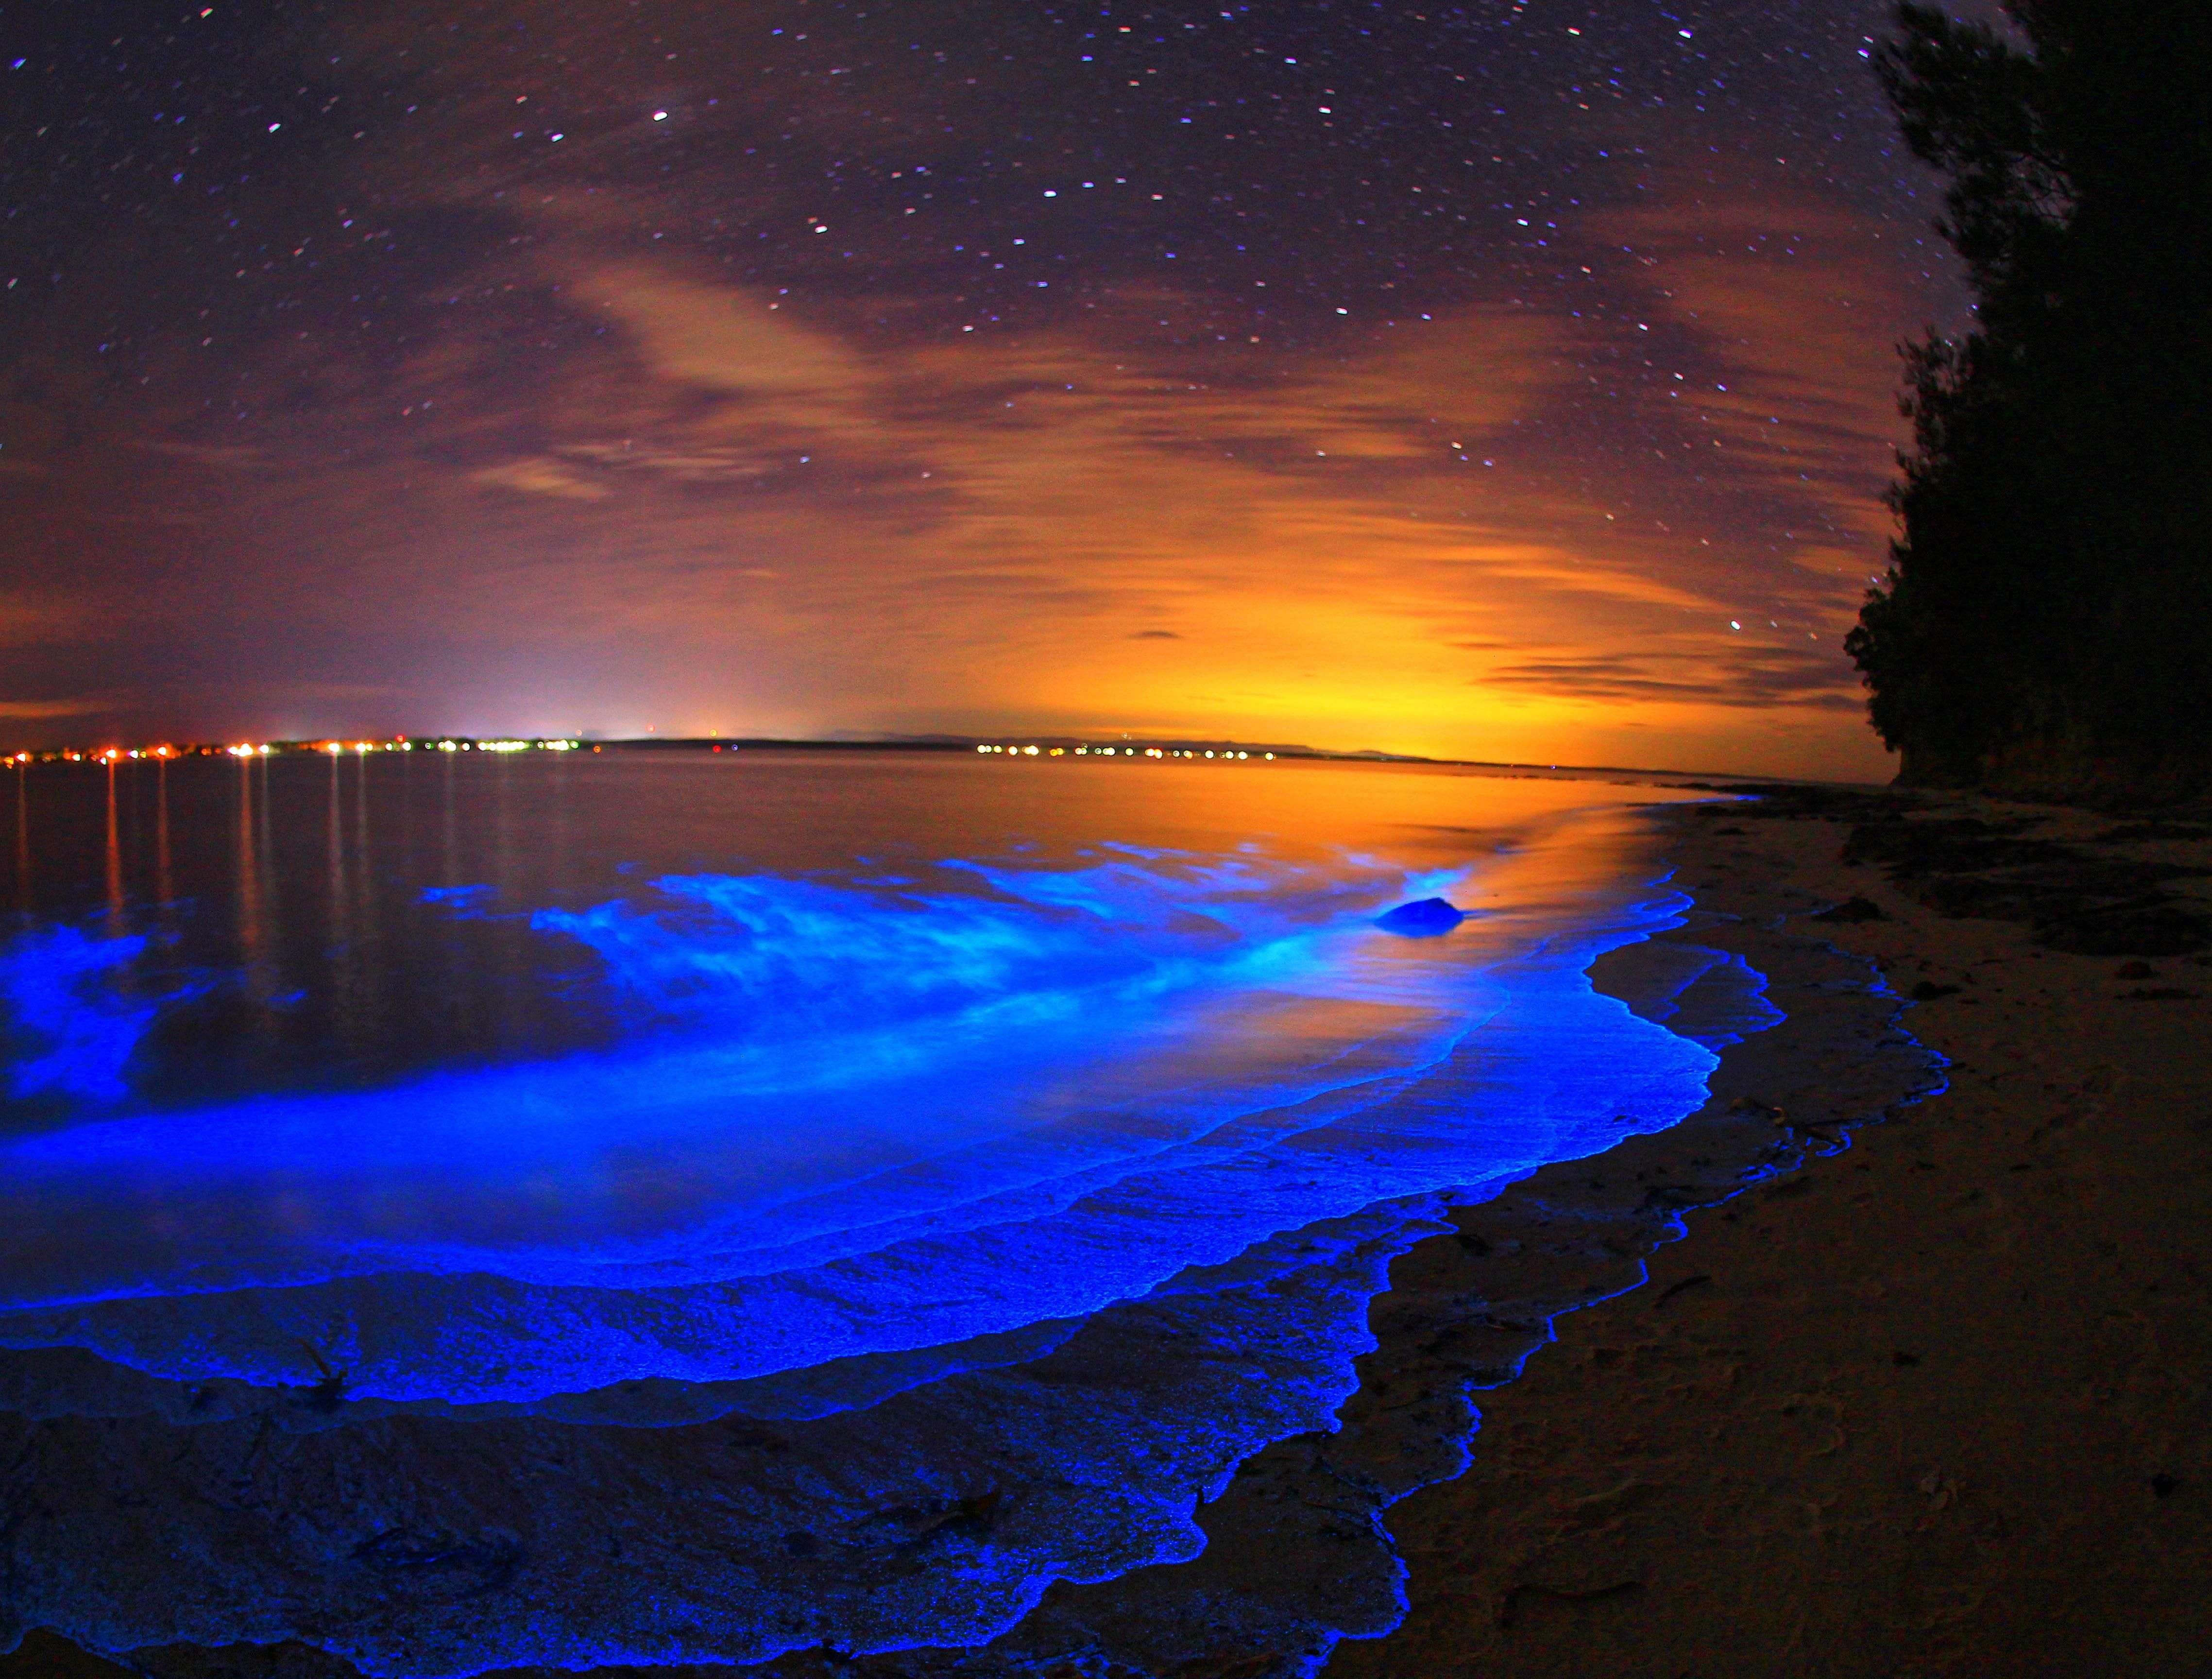 Where Is The Bioluminescent Beach As